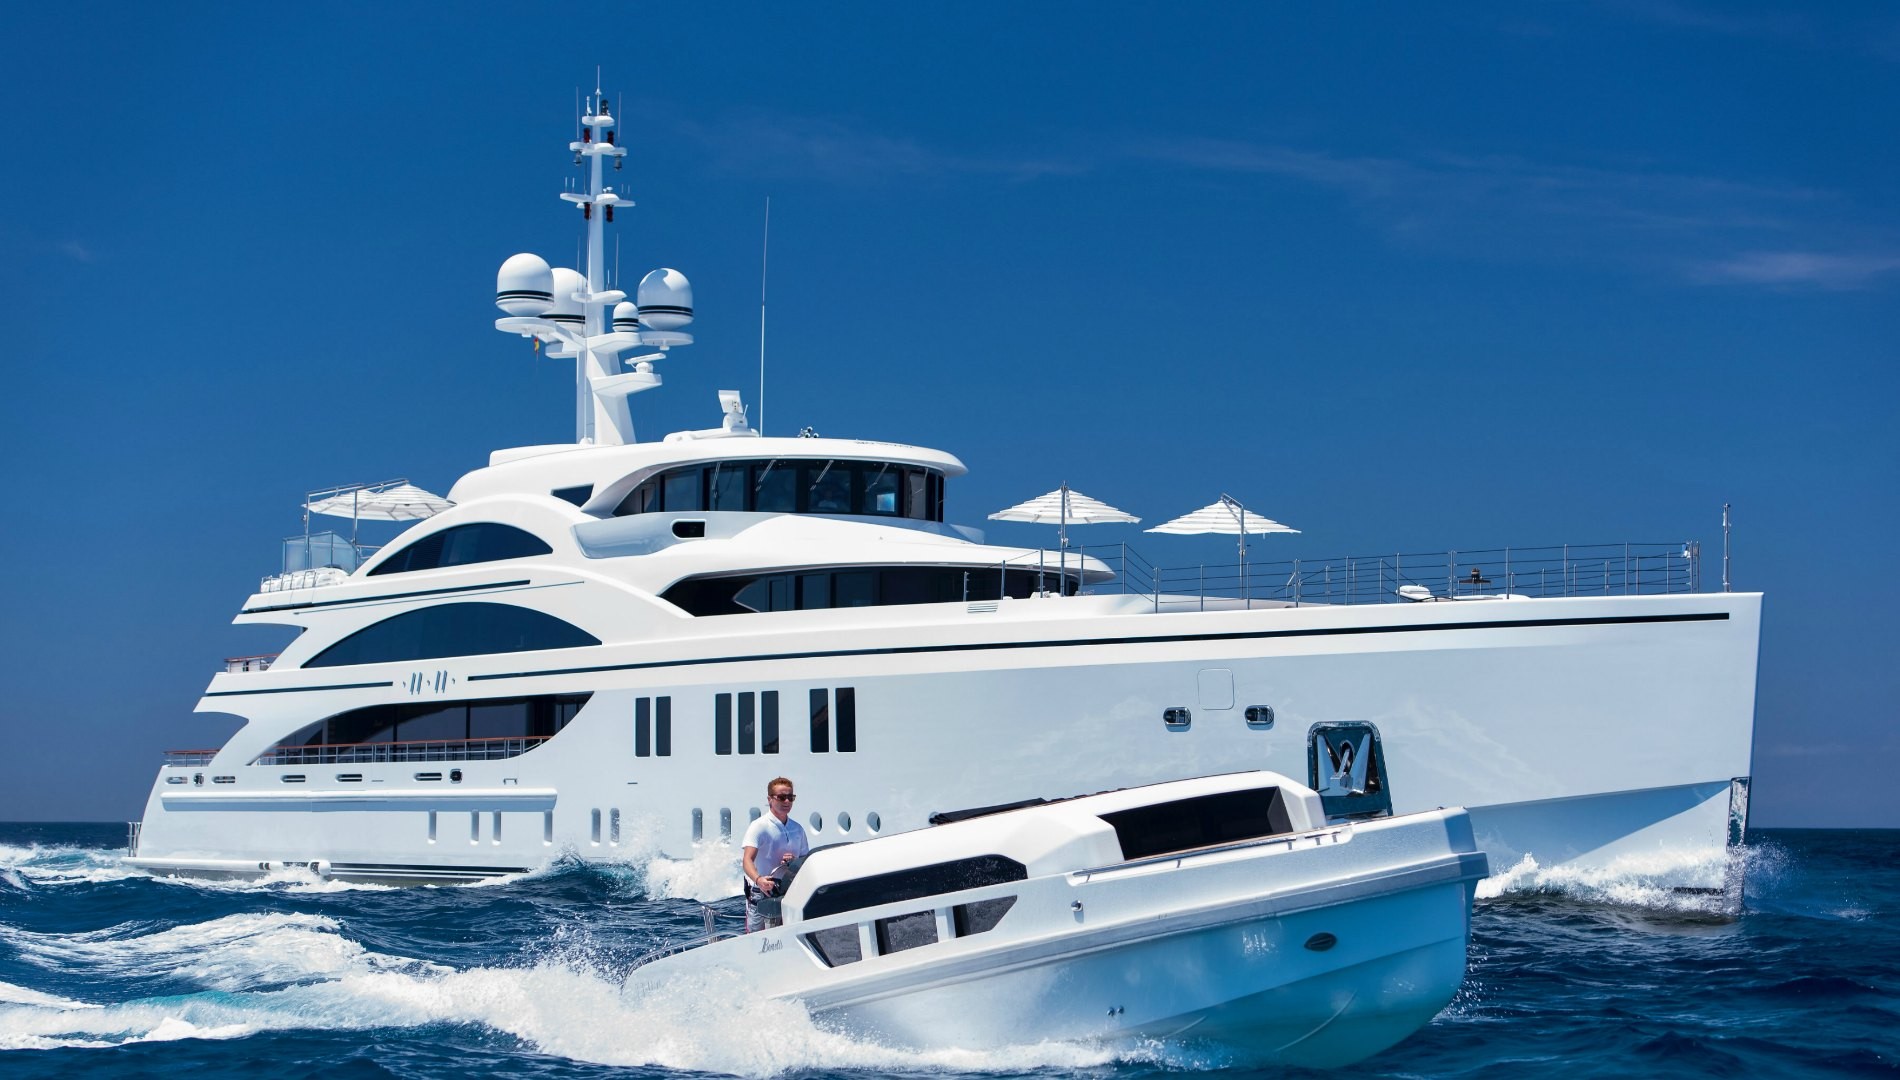 who owns superyacht 11.11